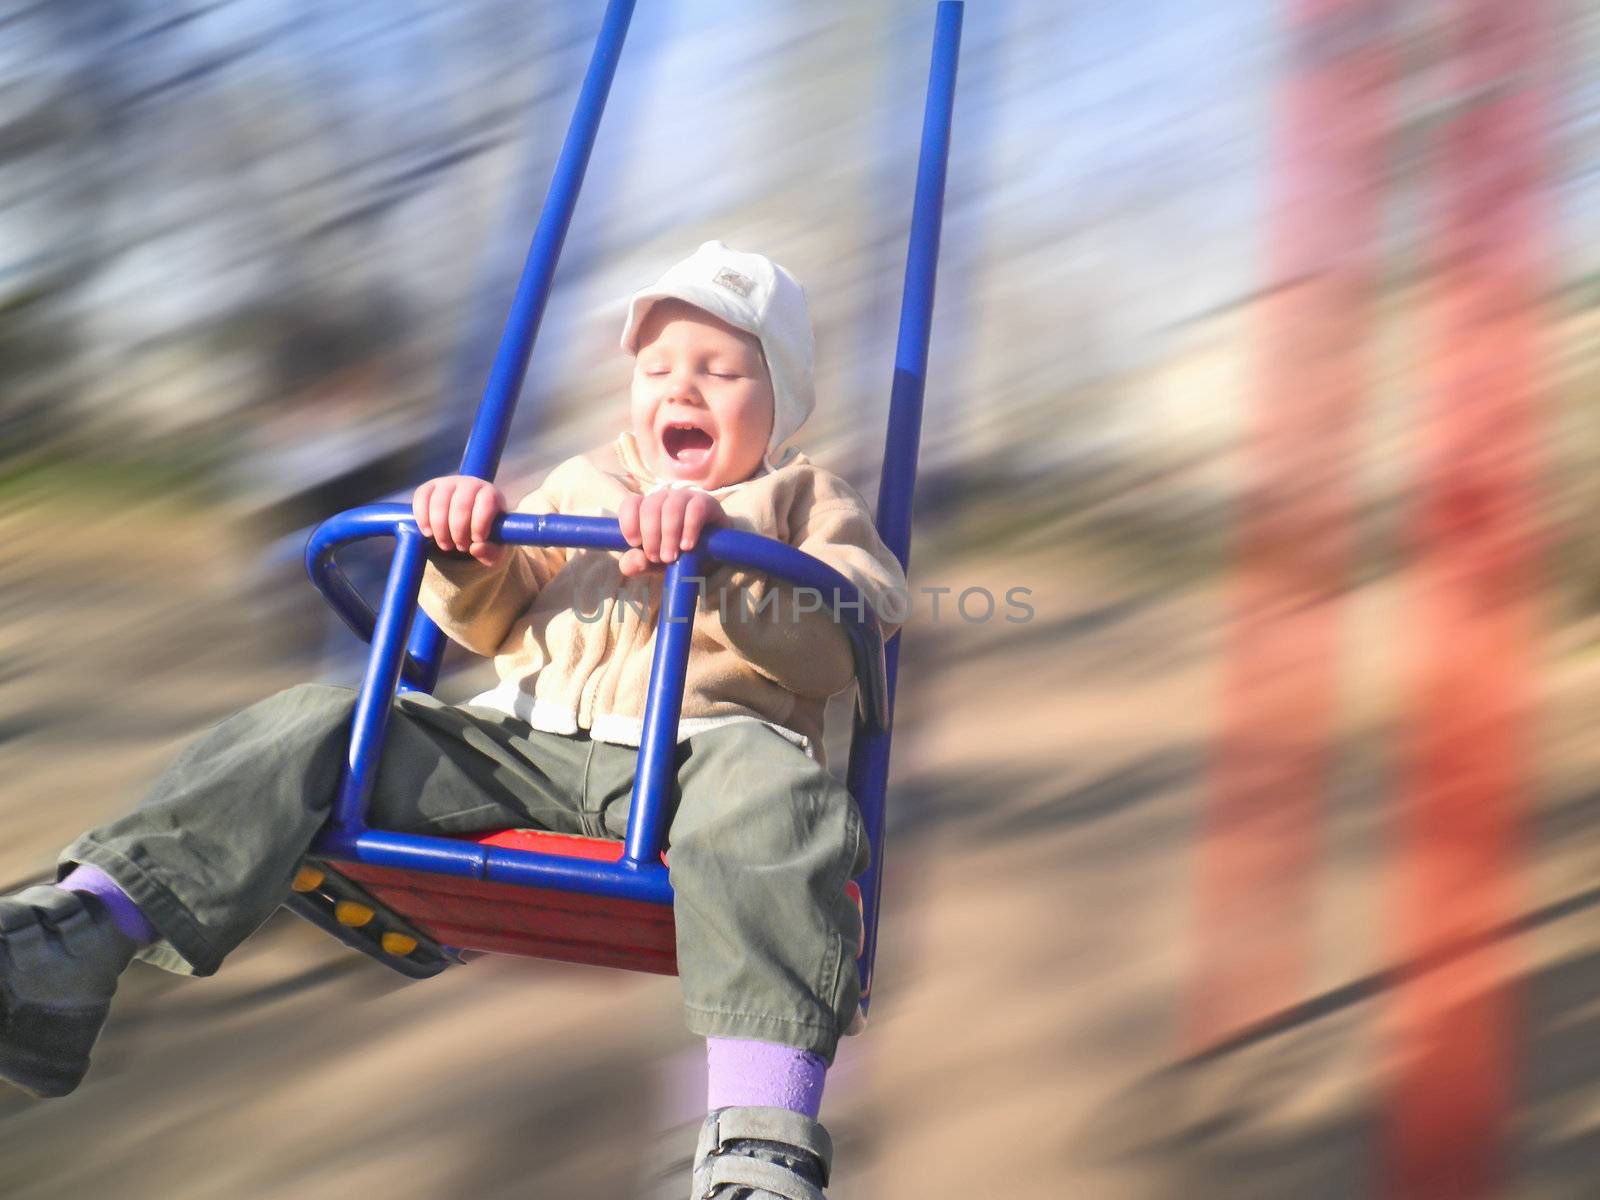 Enthusiastic kid on a swing